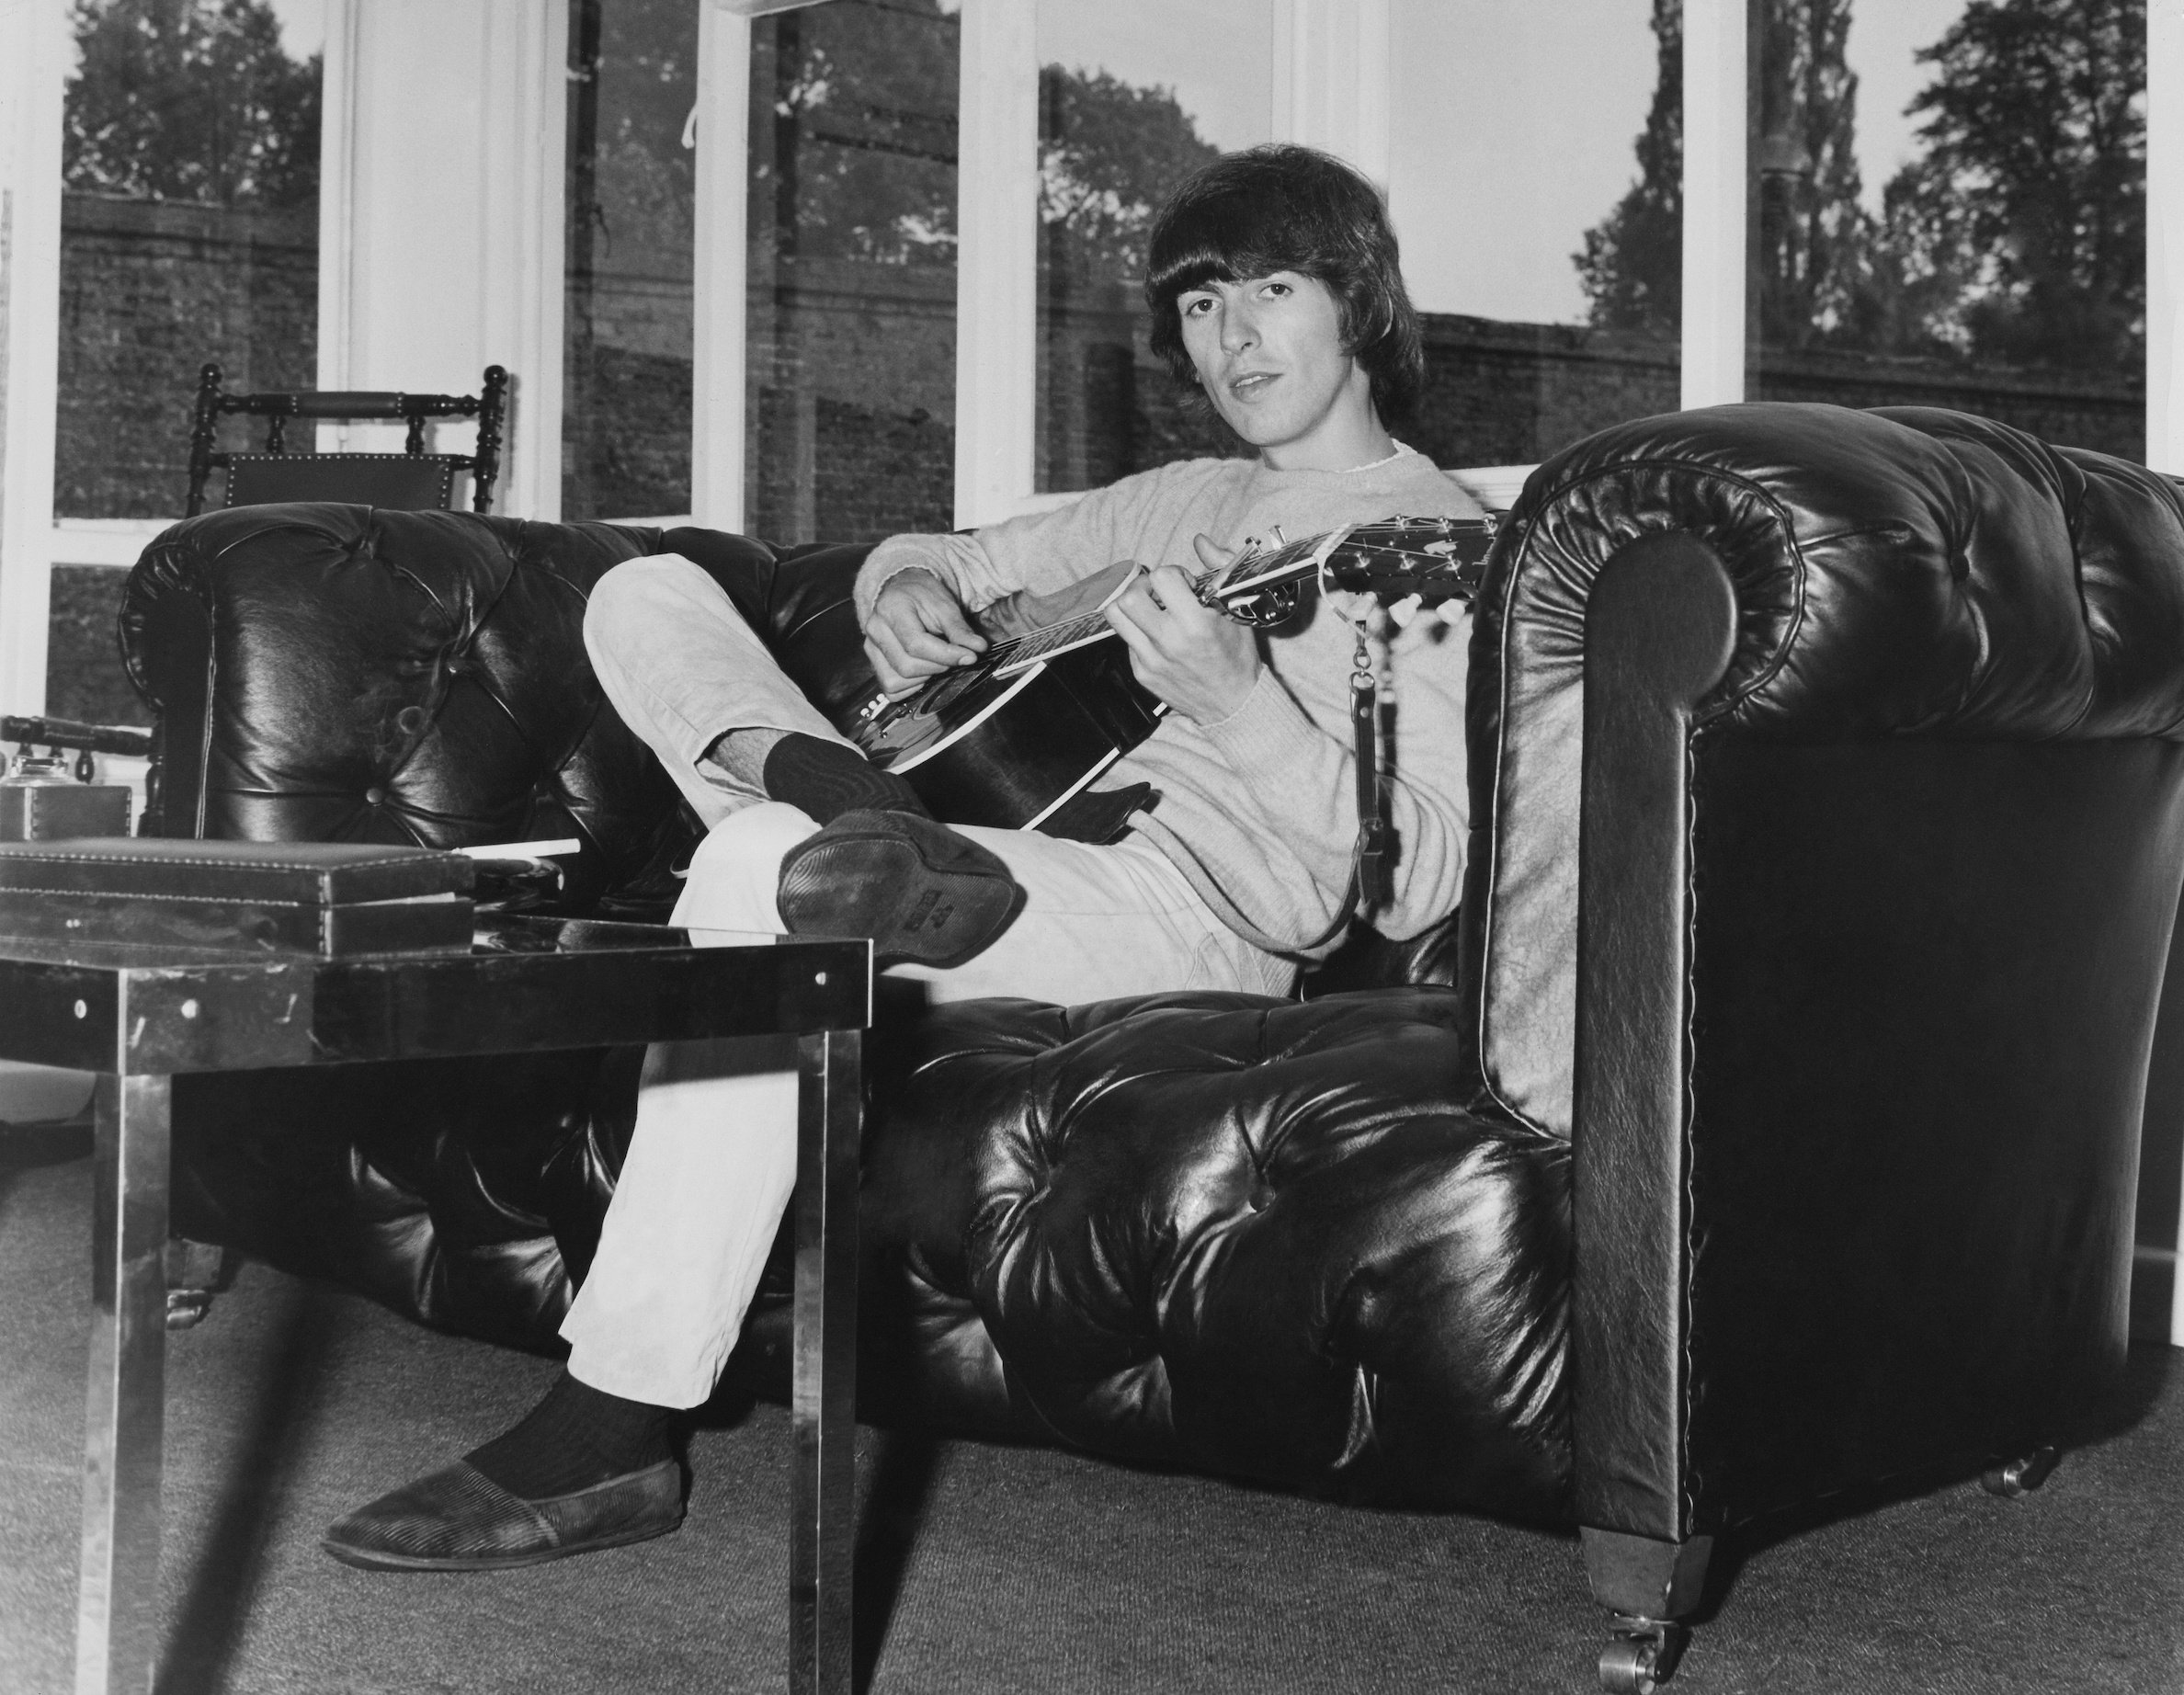 George Harrison of The Beatles playing guitar